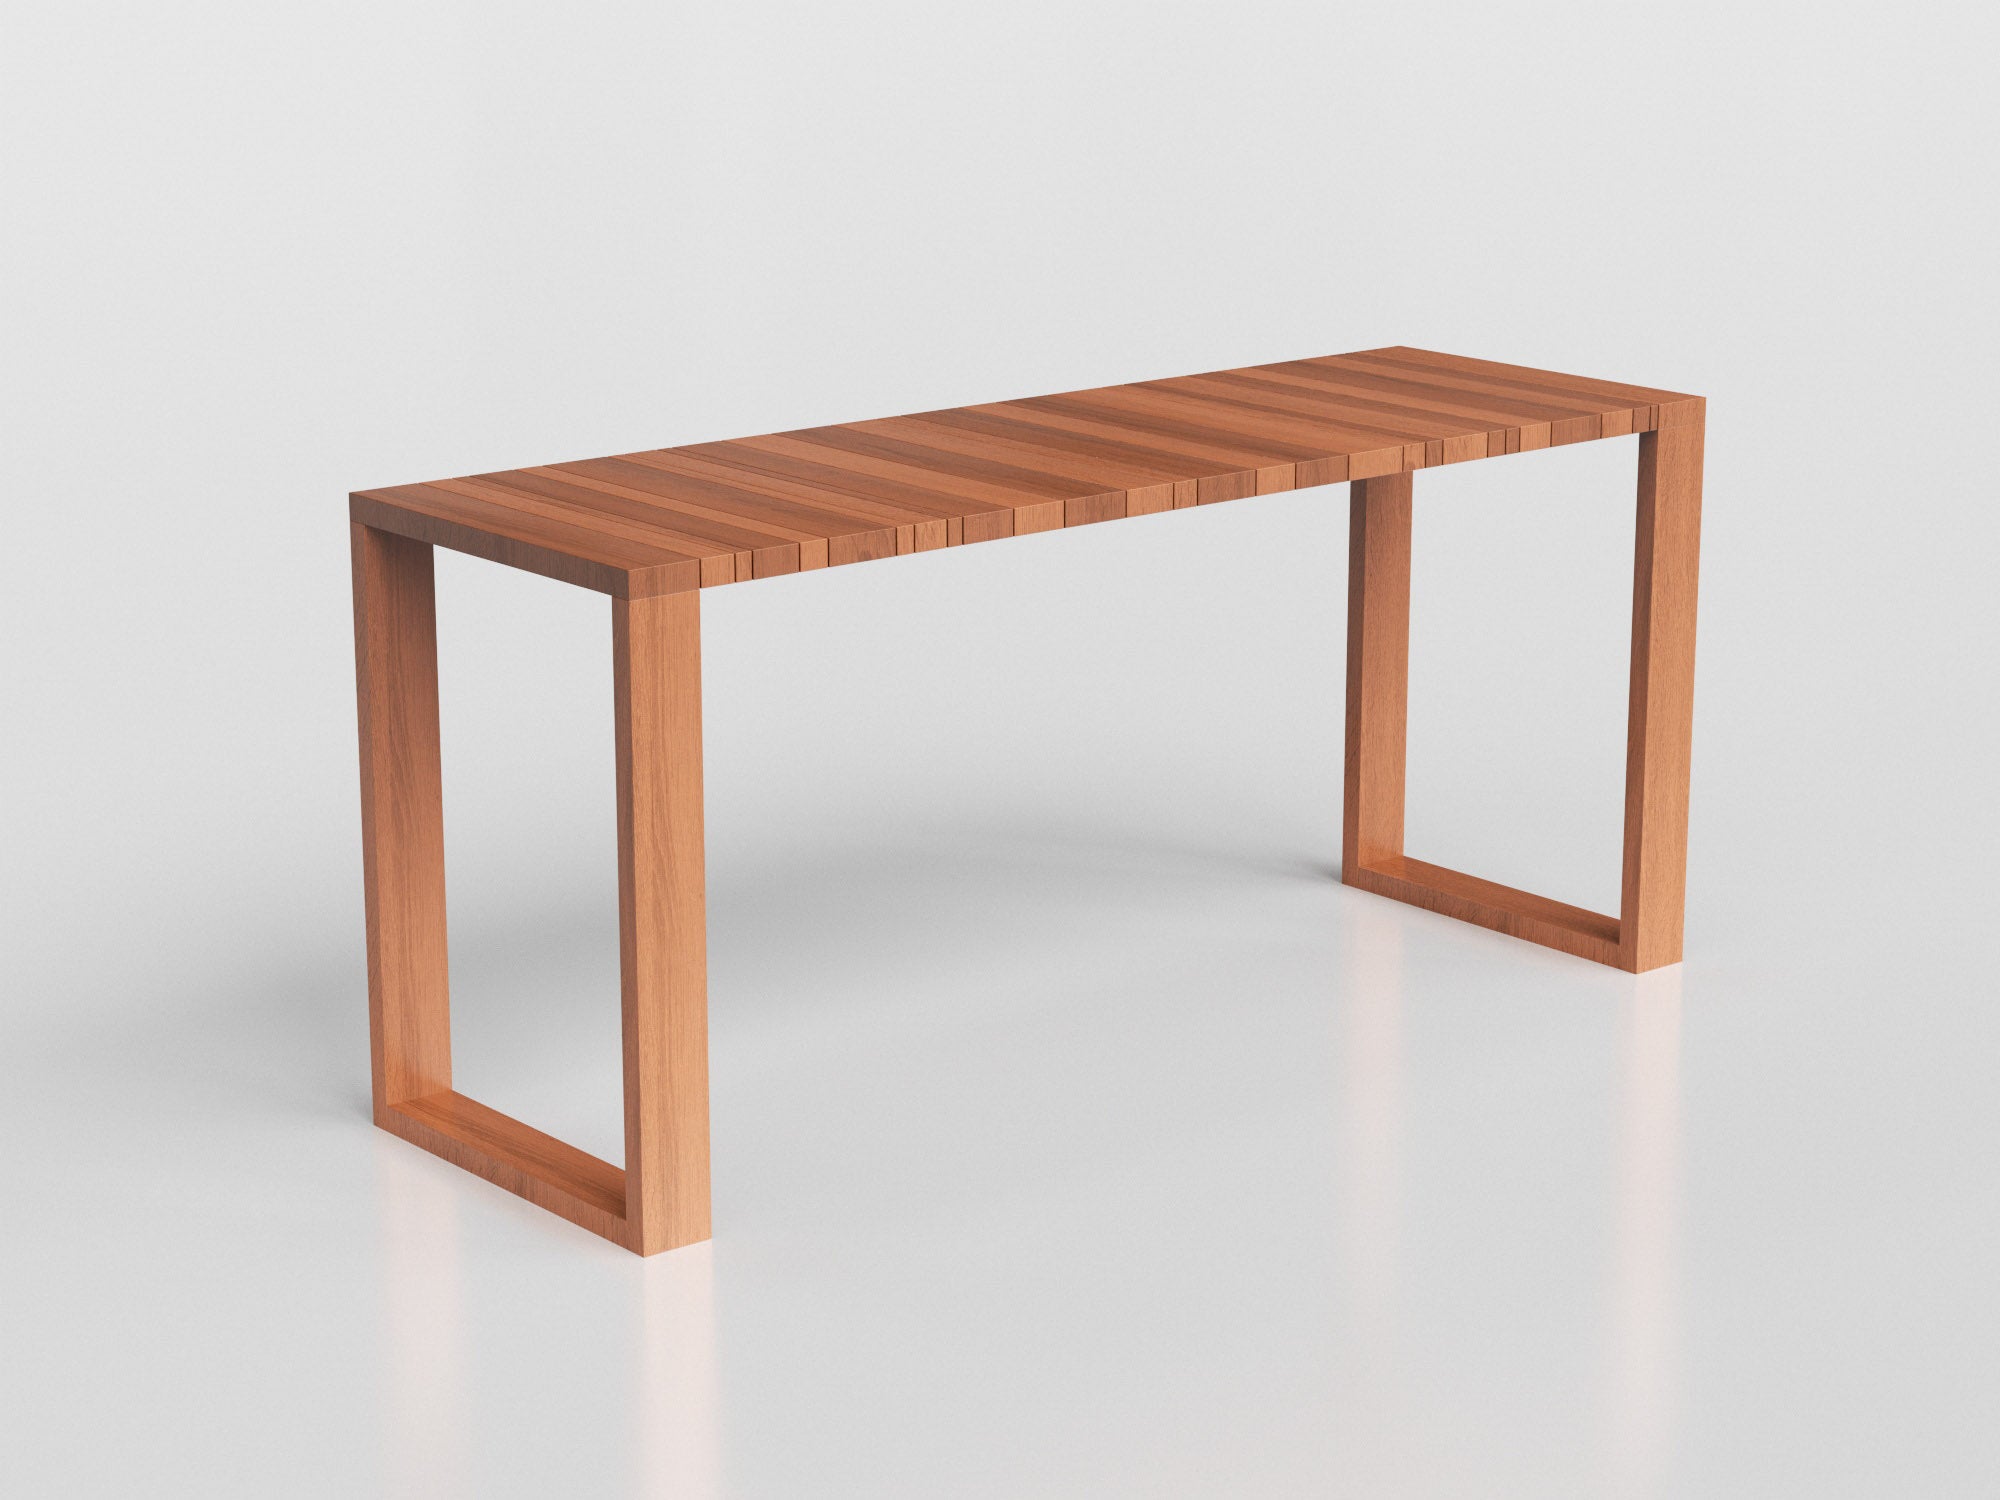 Fusion Console with wood estruture and top for outdoor areas, designed by Maria Candida Machado